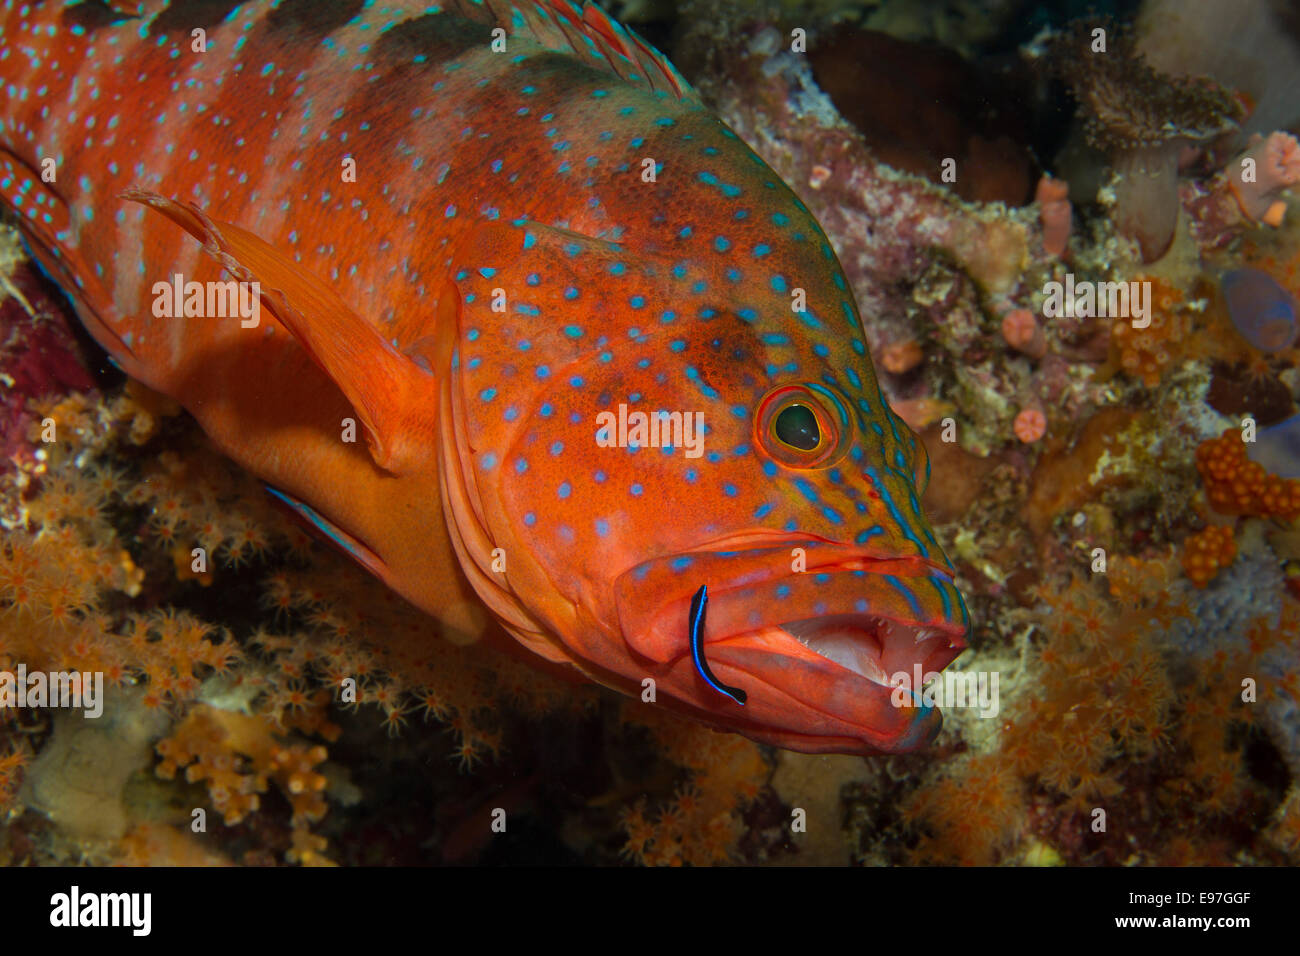 Mutualistic behavior of a Neon goby cleaning debris and parasites from a Coral grouper. Stock Photo